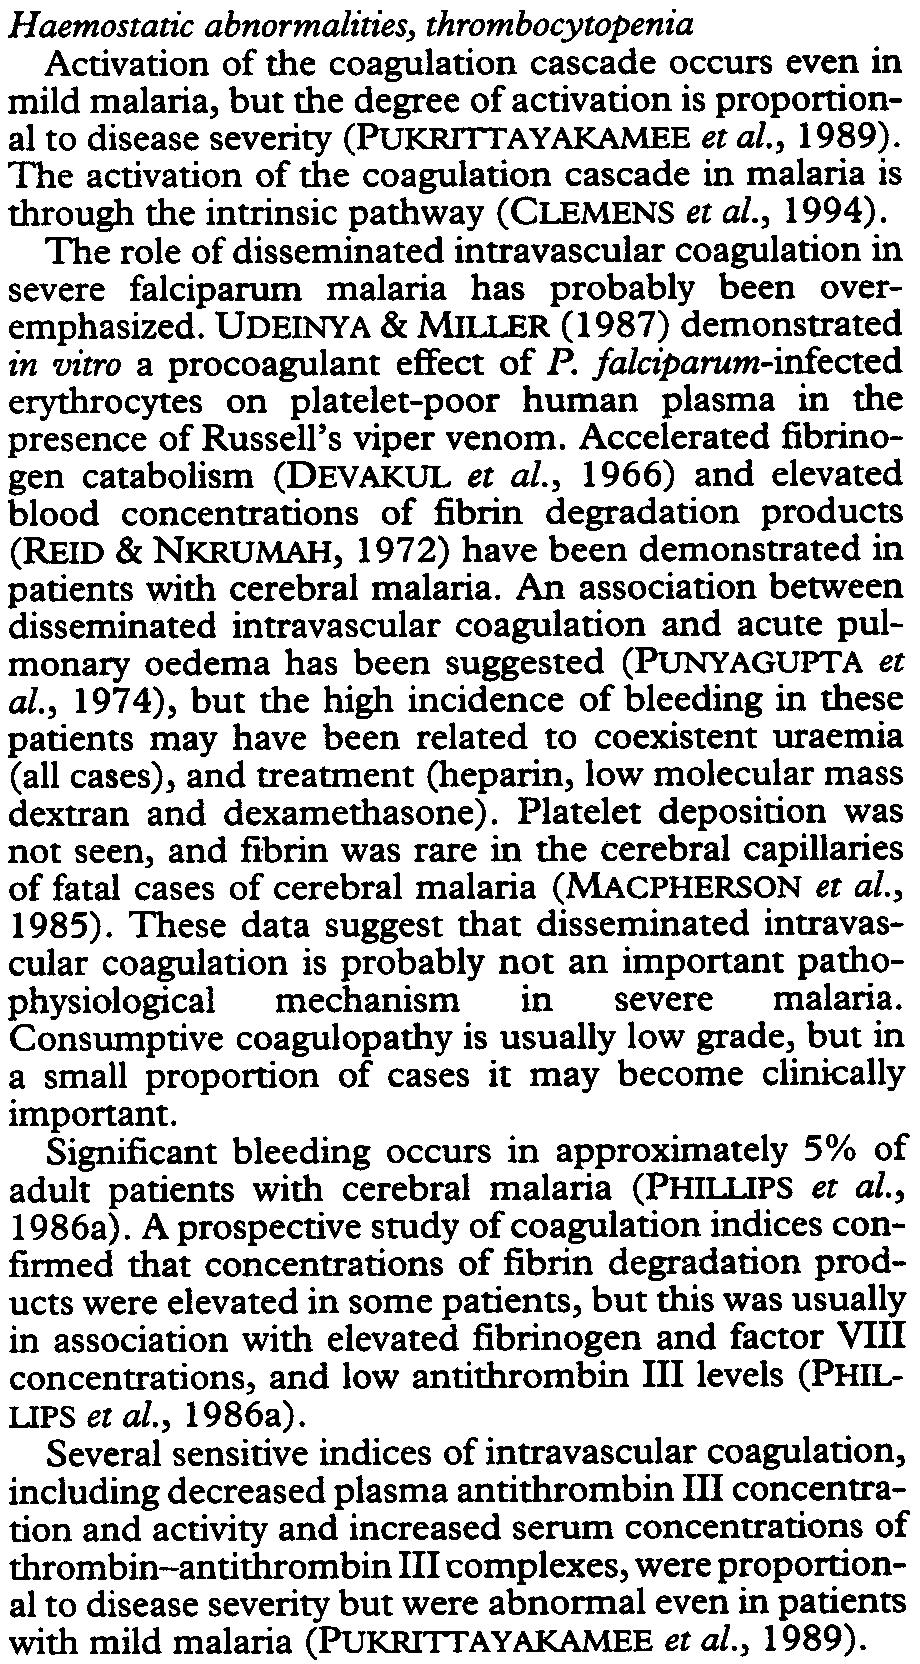 , 1958; ADNER et al., 1968; CANFIELD, 1969). Classical blackwater fever may now be exrinct, but haemoglobinuria may occur in overwhelming infections and in patients with red blood cell abnormalities.